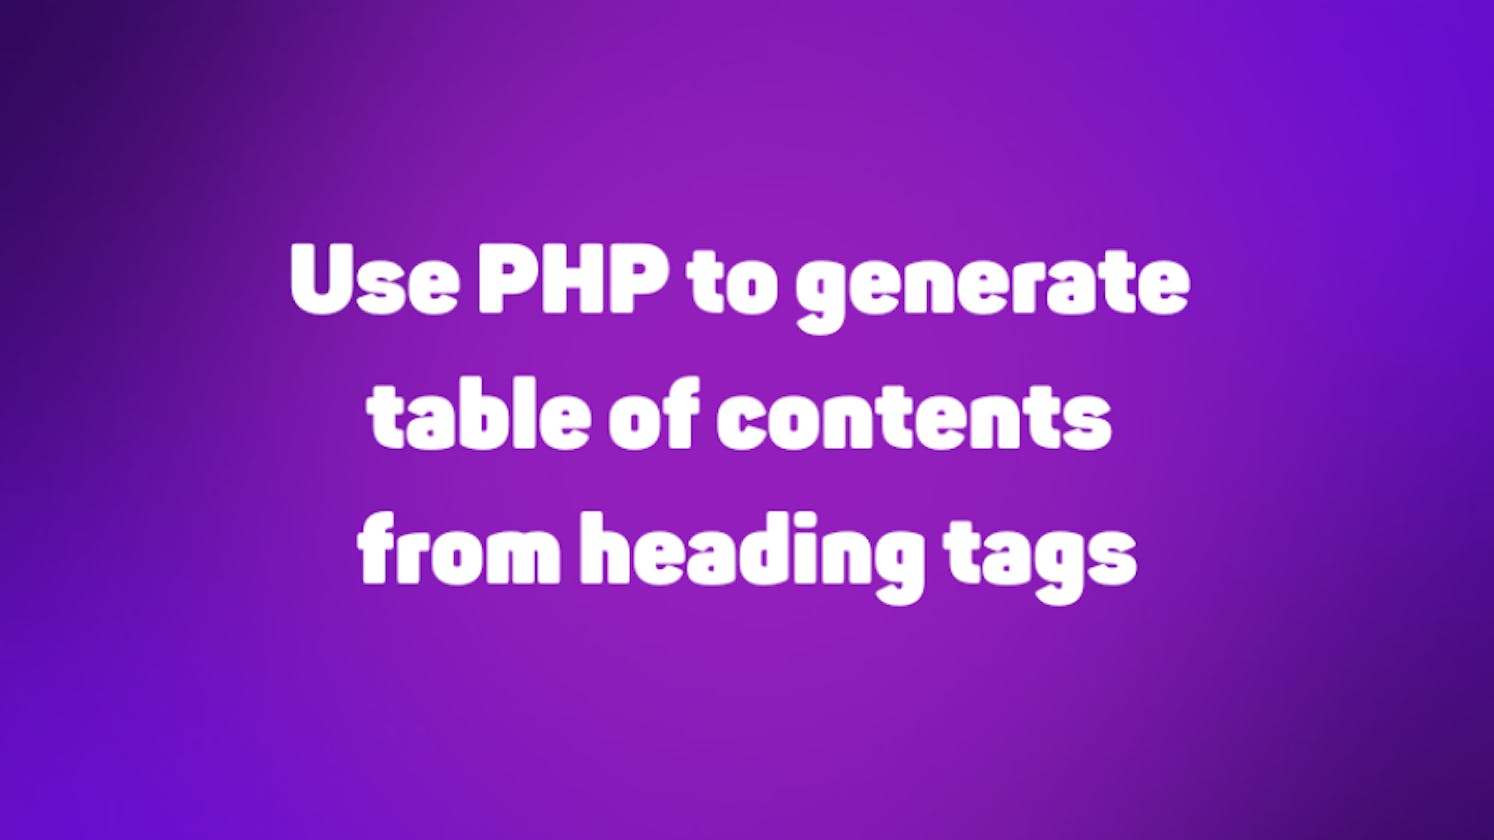 use-php-to-generate-table-of-contents-from-heading-tags